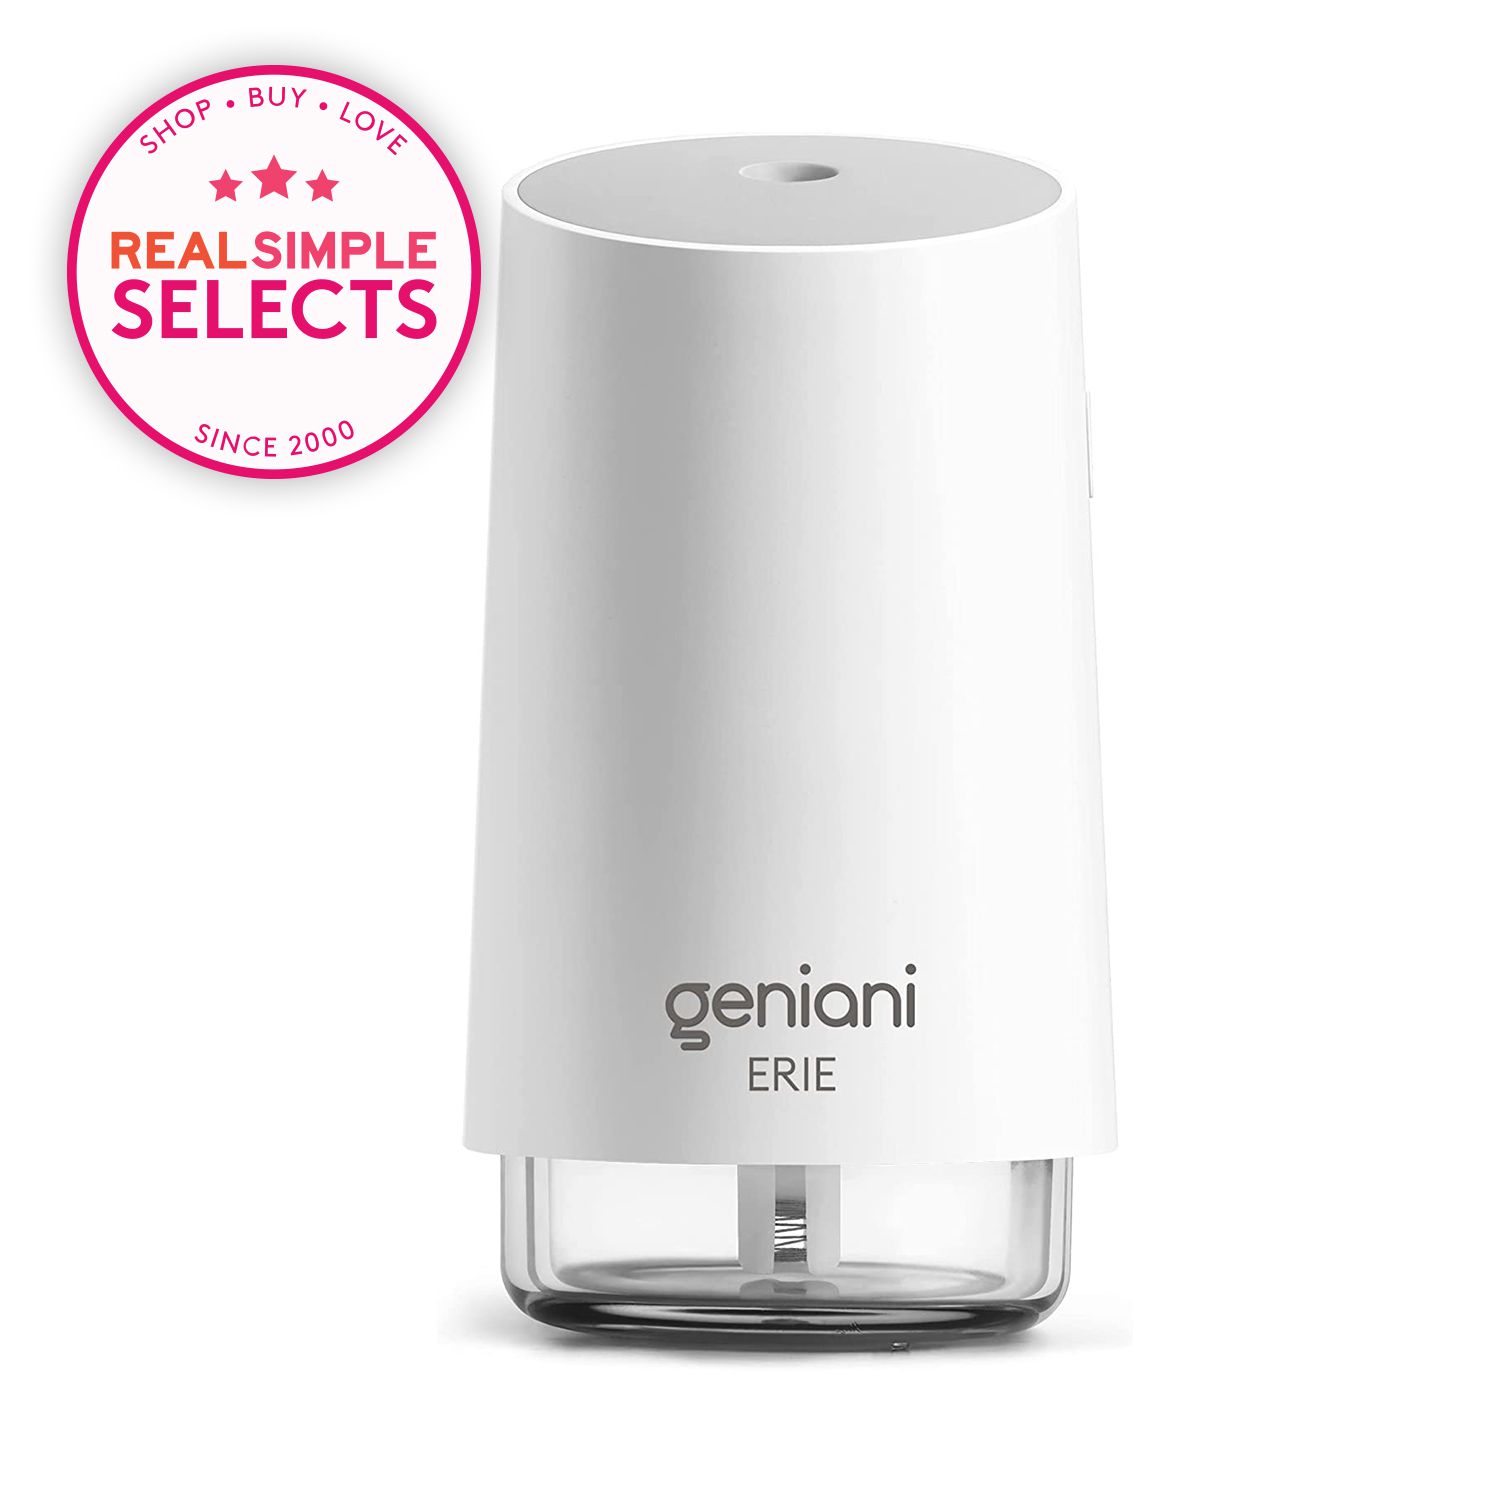 Geniani Erie Portable Small Cool Mist Humidifier